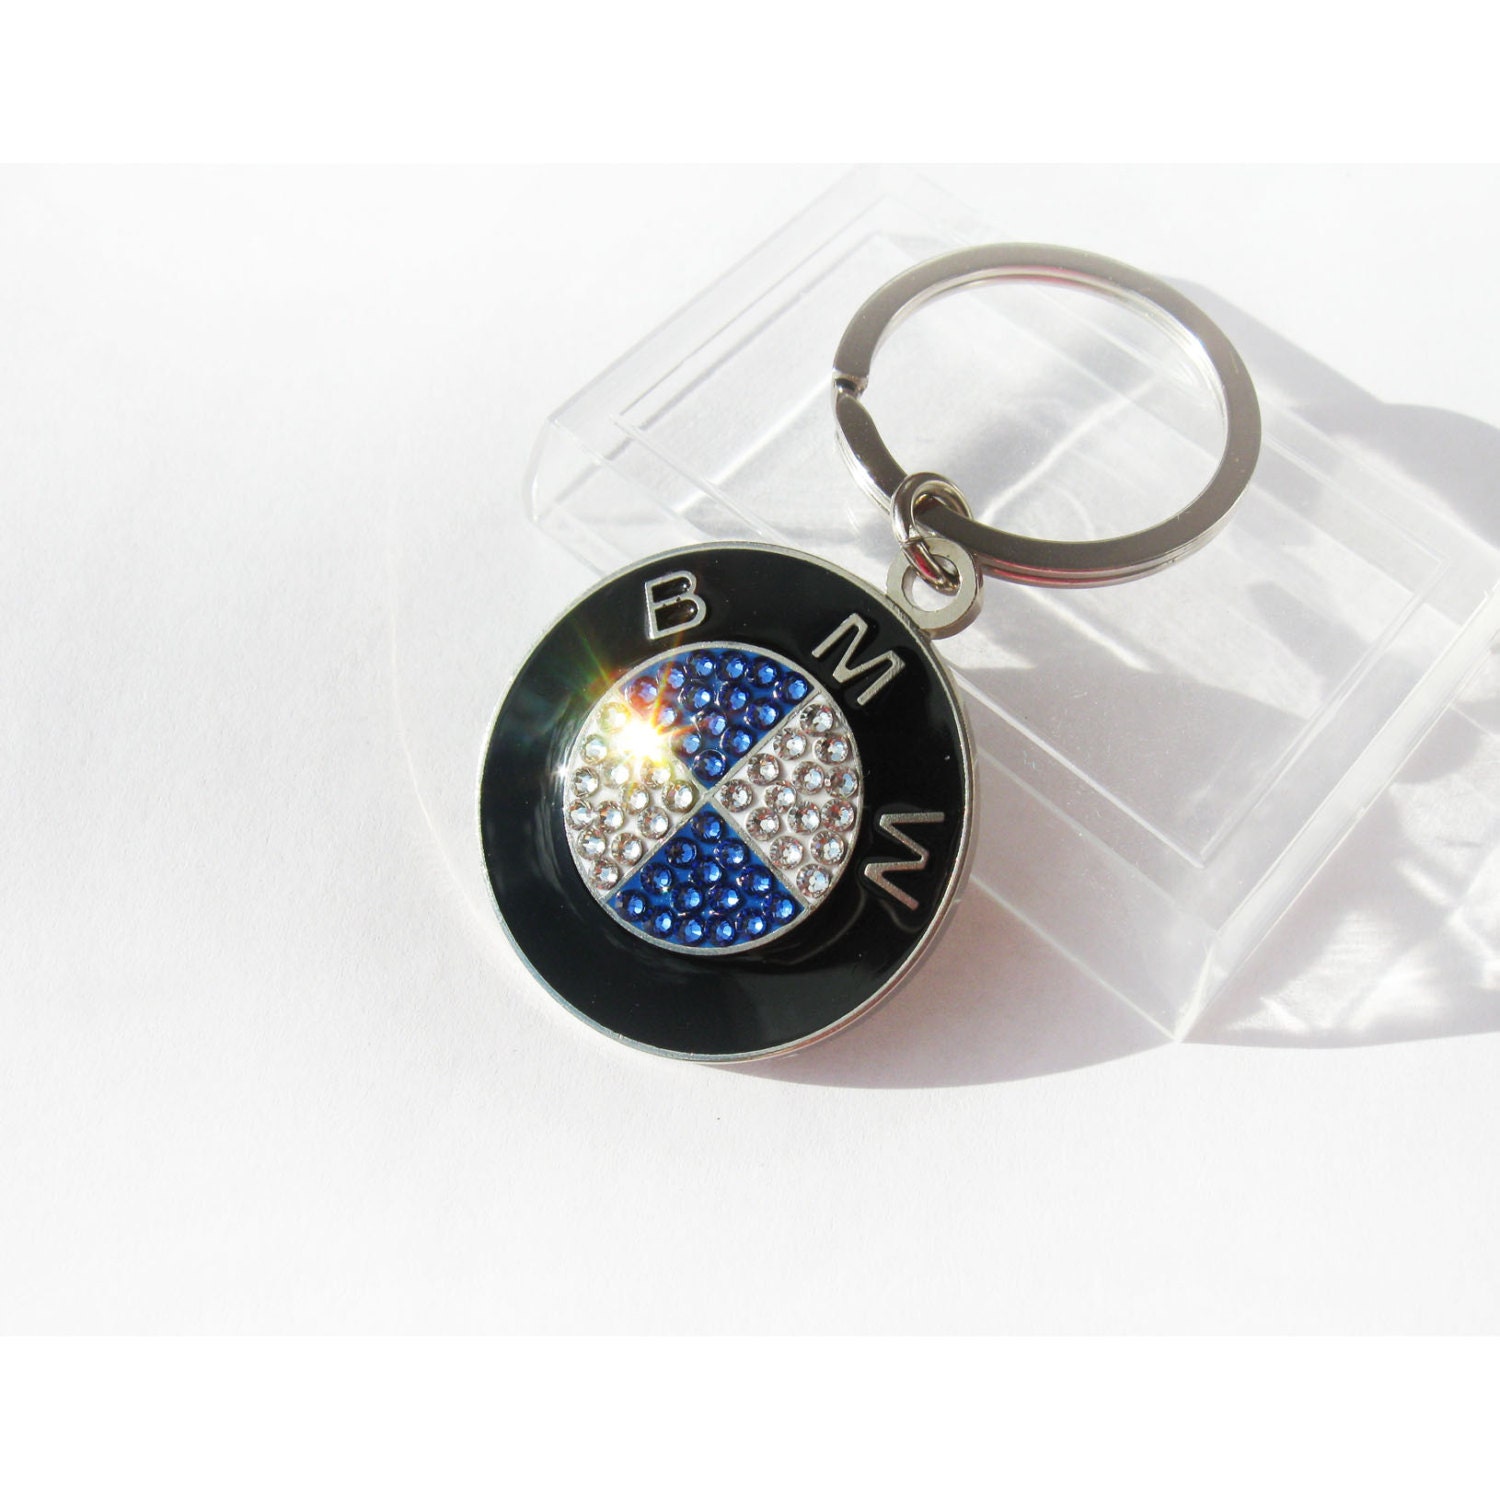 Mercedes bling keychains #5